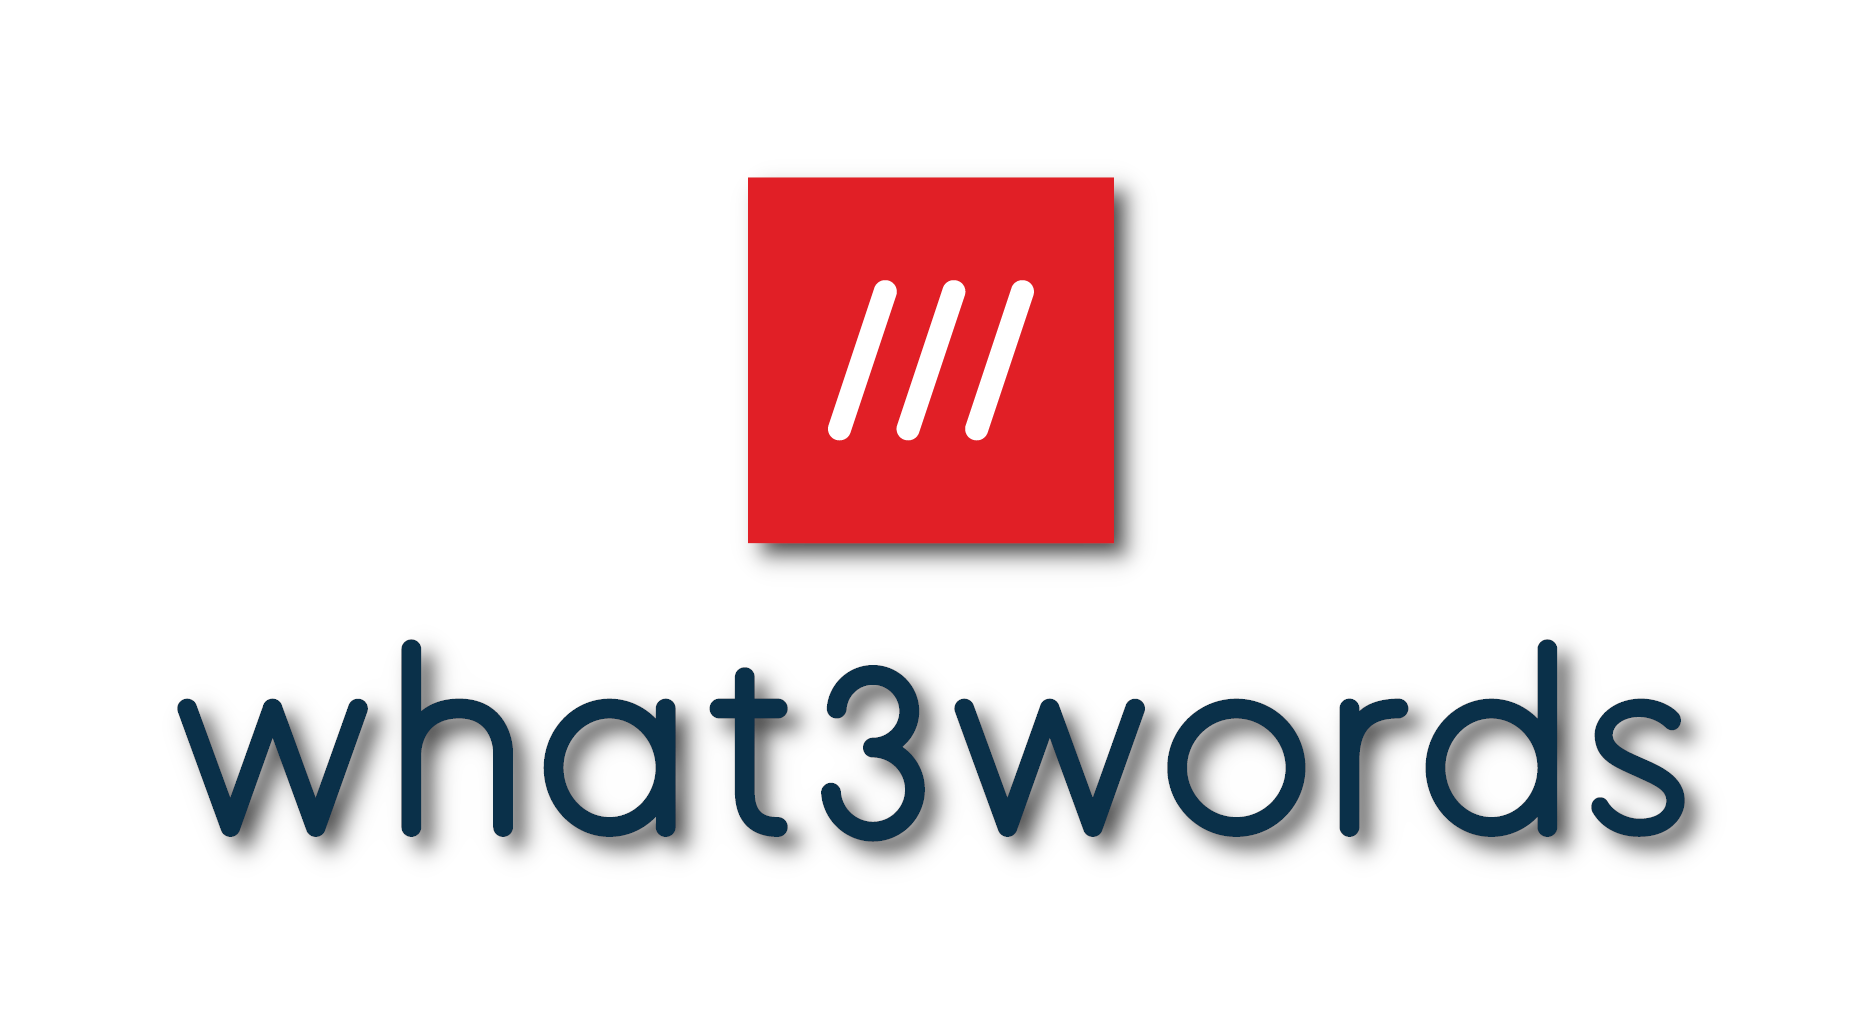 Benefits of ‘what3words’